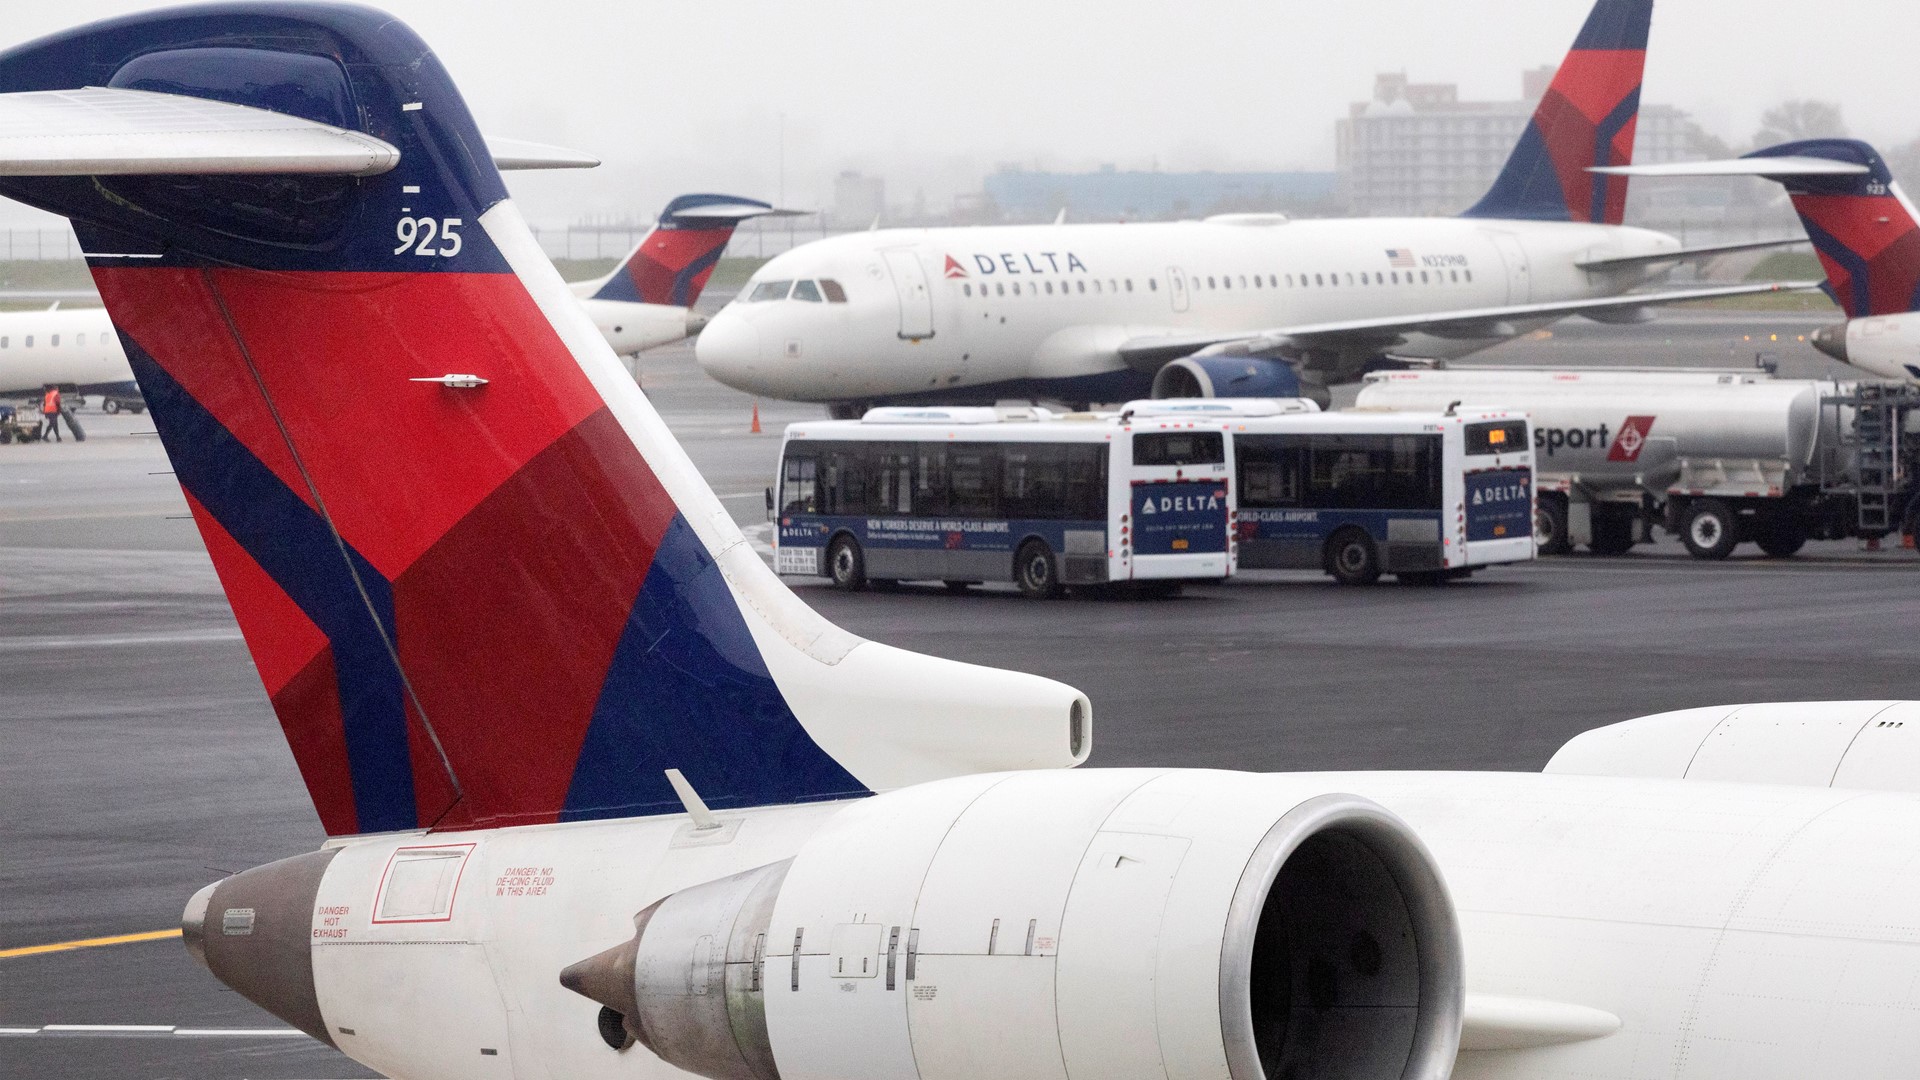 Delta isn't going as far as United Airlines, which will require employees to get vaccinated by late September or face termination.